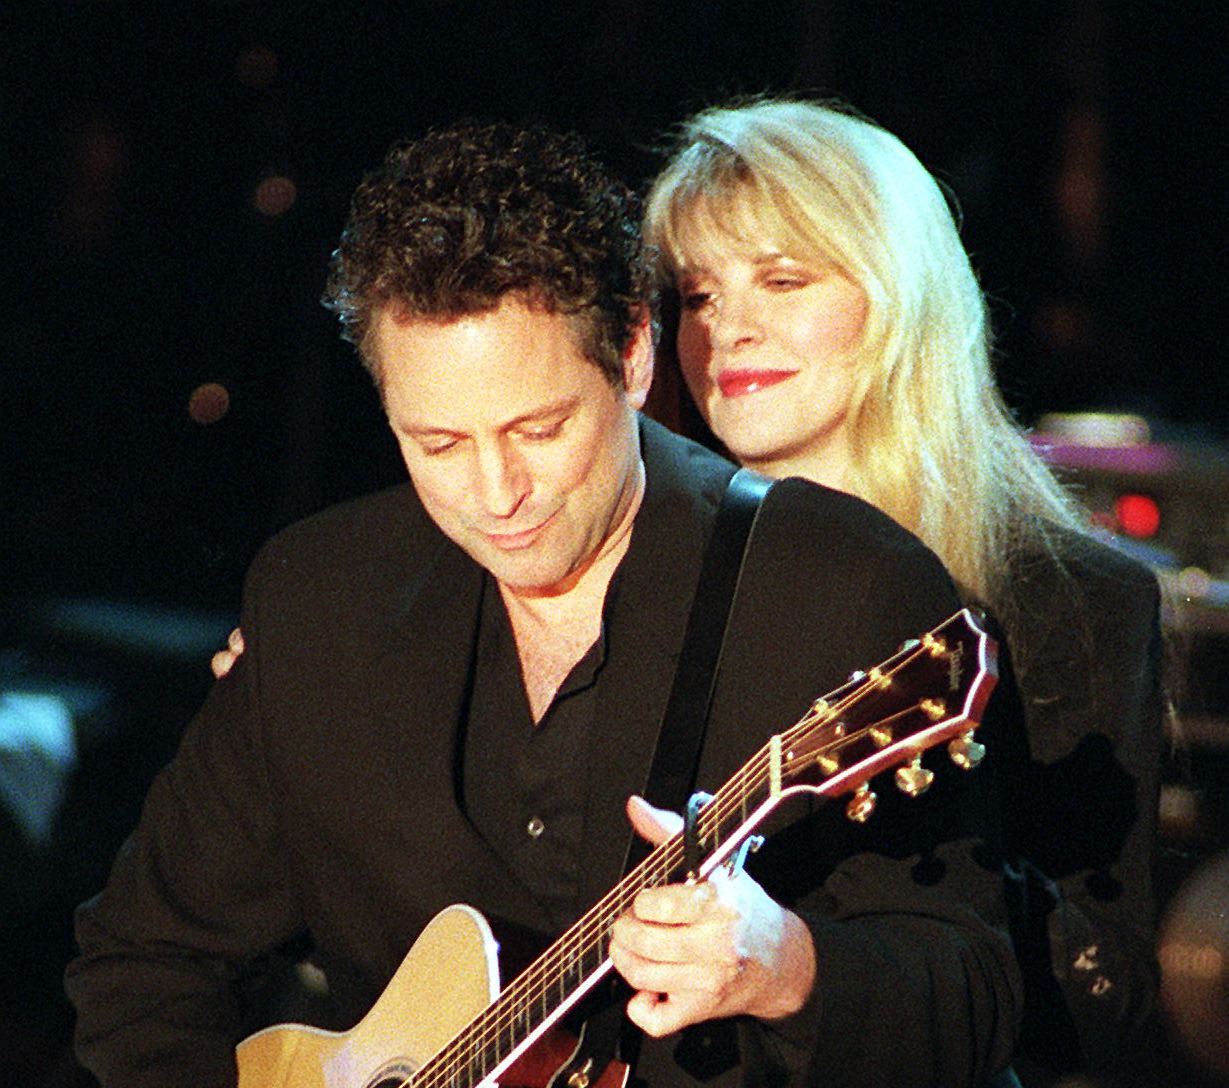 Stevie Nicks Nearly Quit Music Because of Her Relationship With Lindsey Buckingham